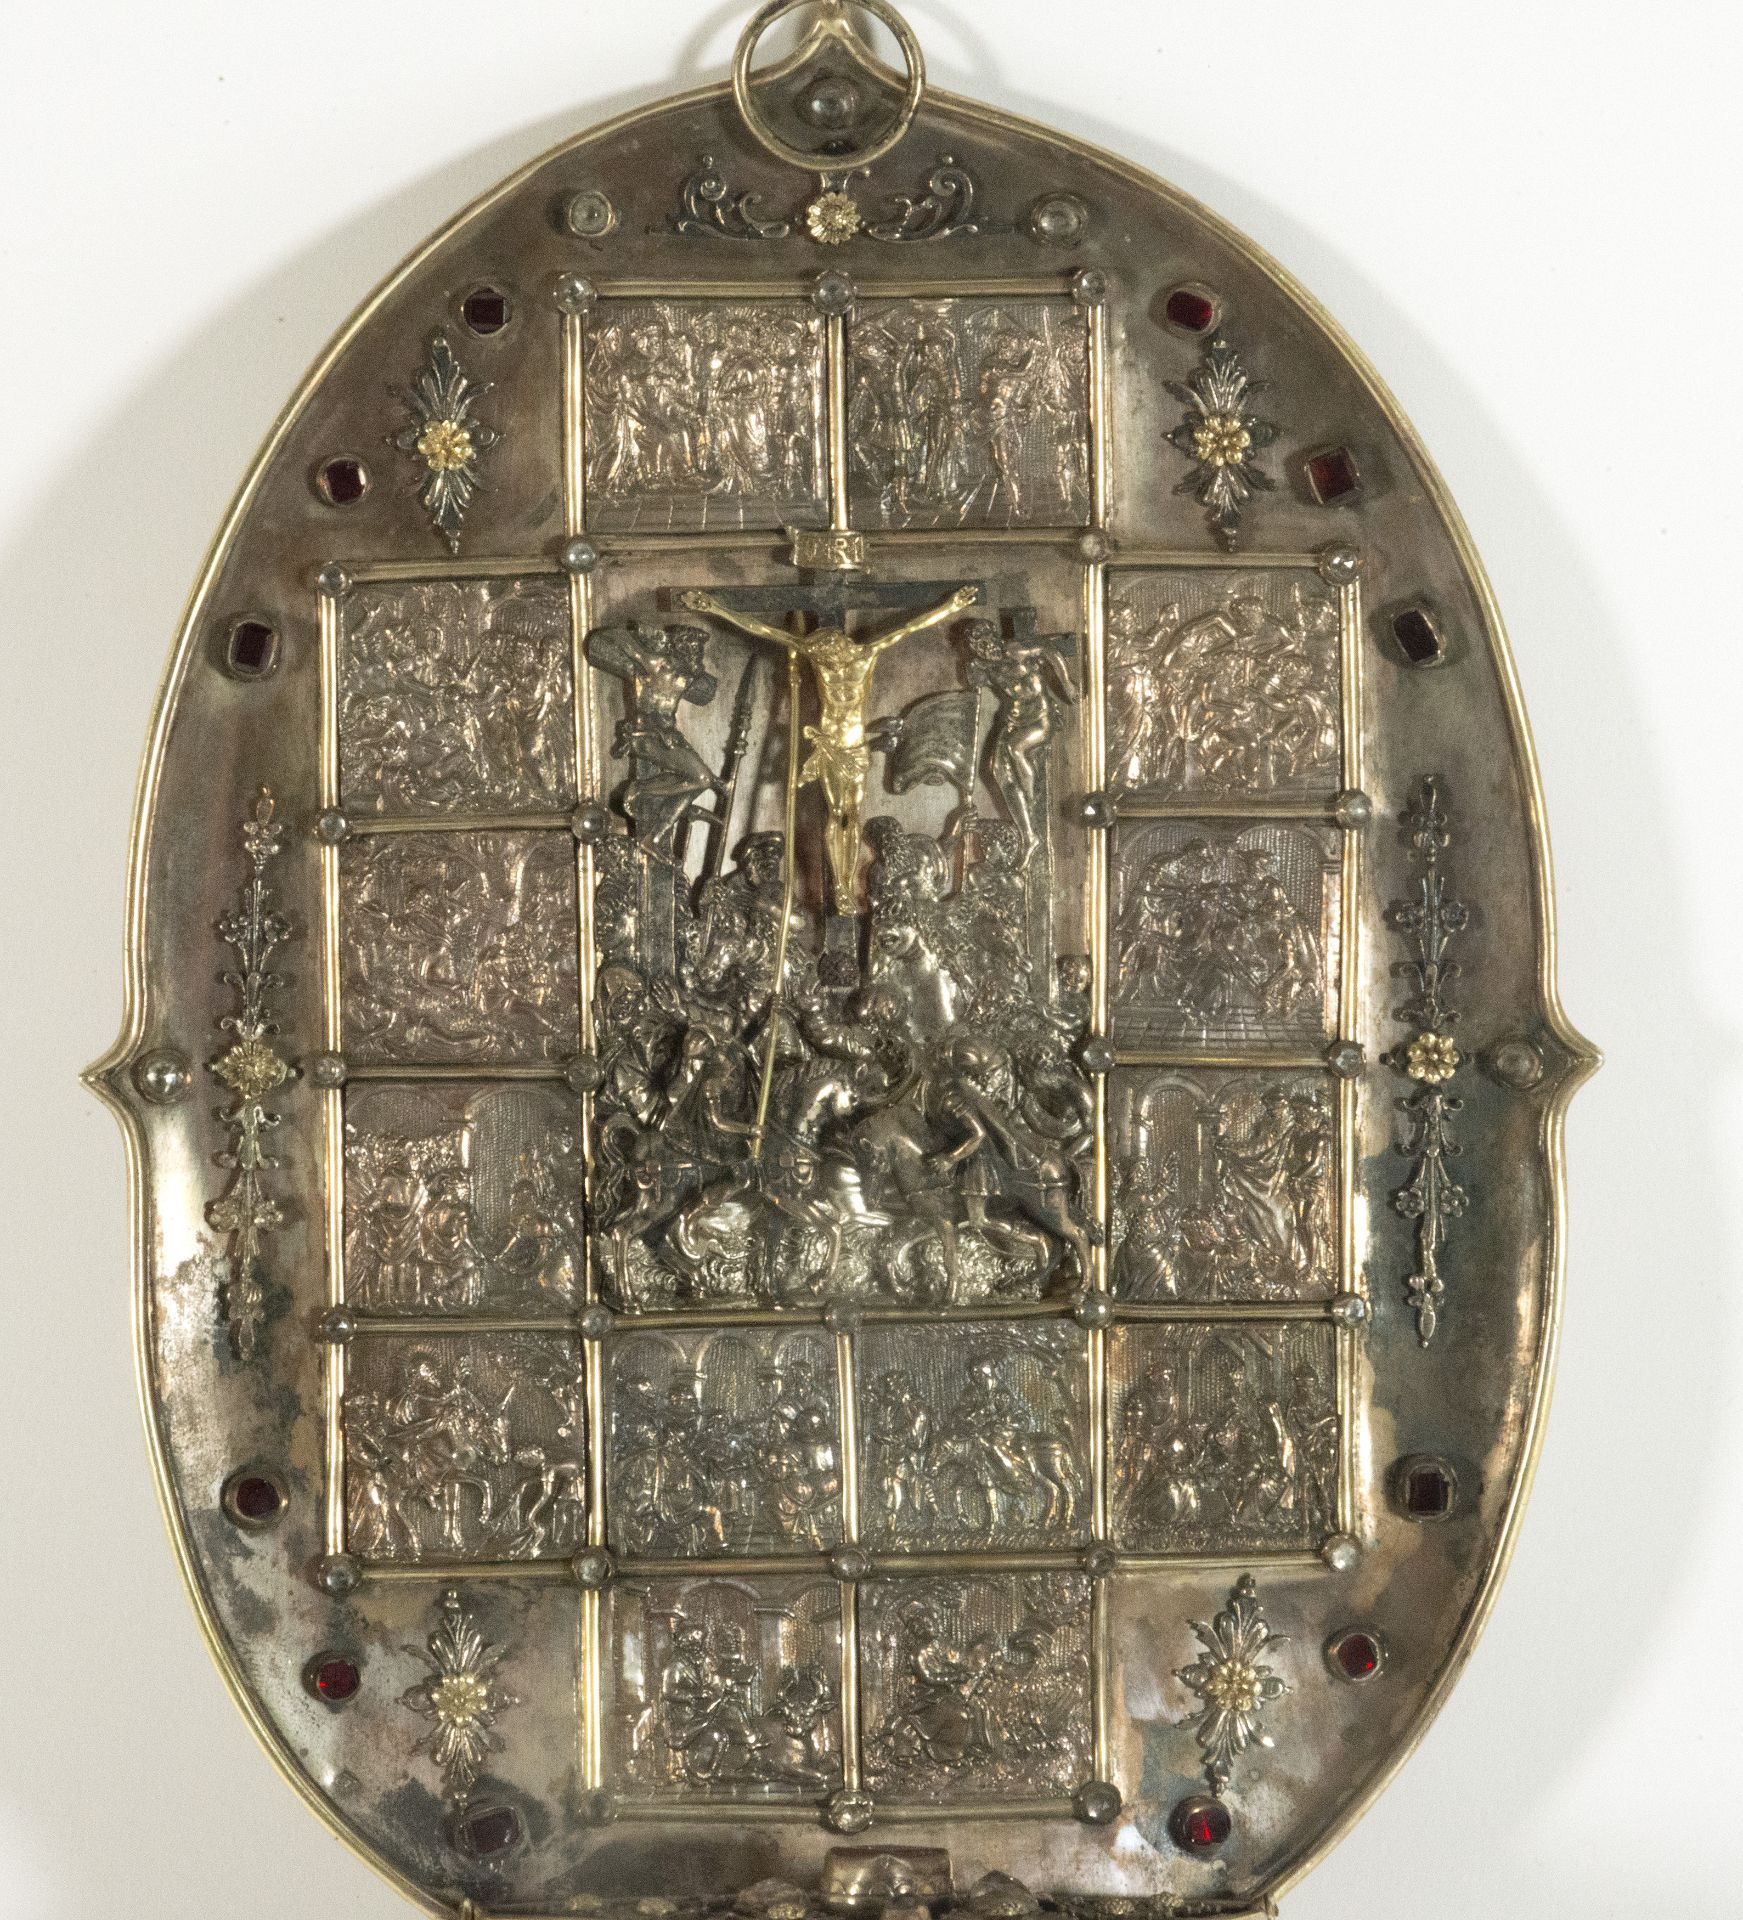 Exceptional Neo-Gothic Benditera in silver and gilded silver of Austrian Law from the end of the 19t - Image 2 of 6